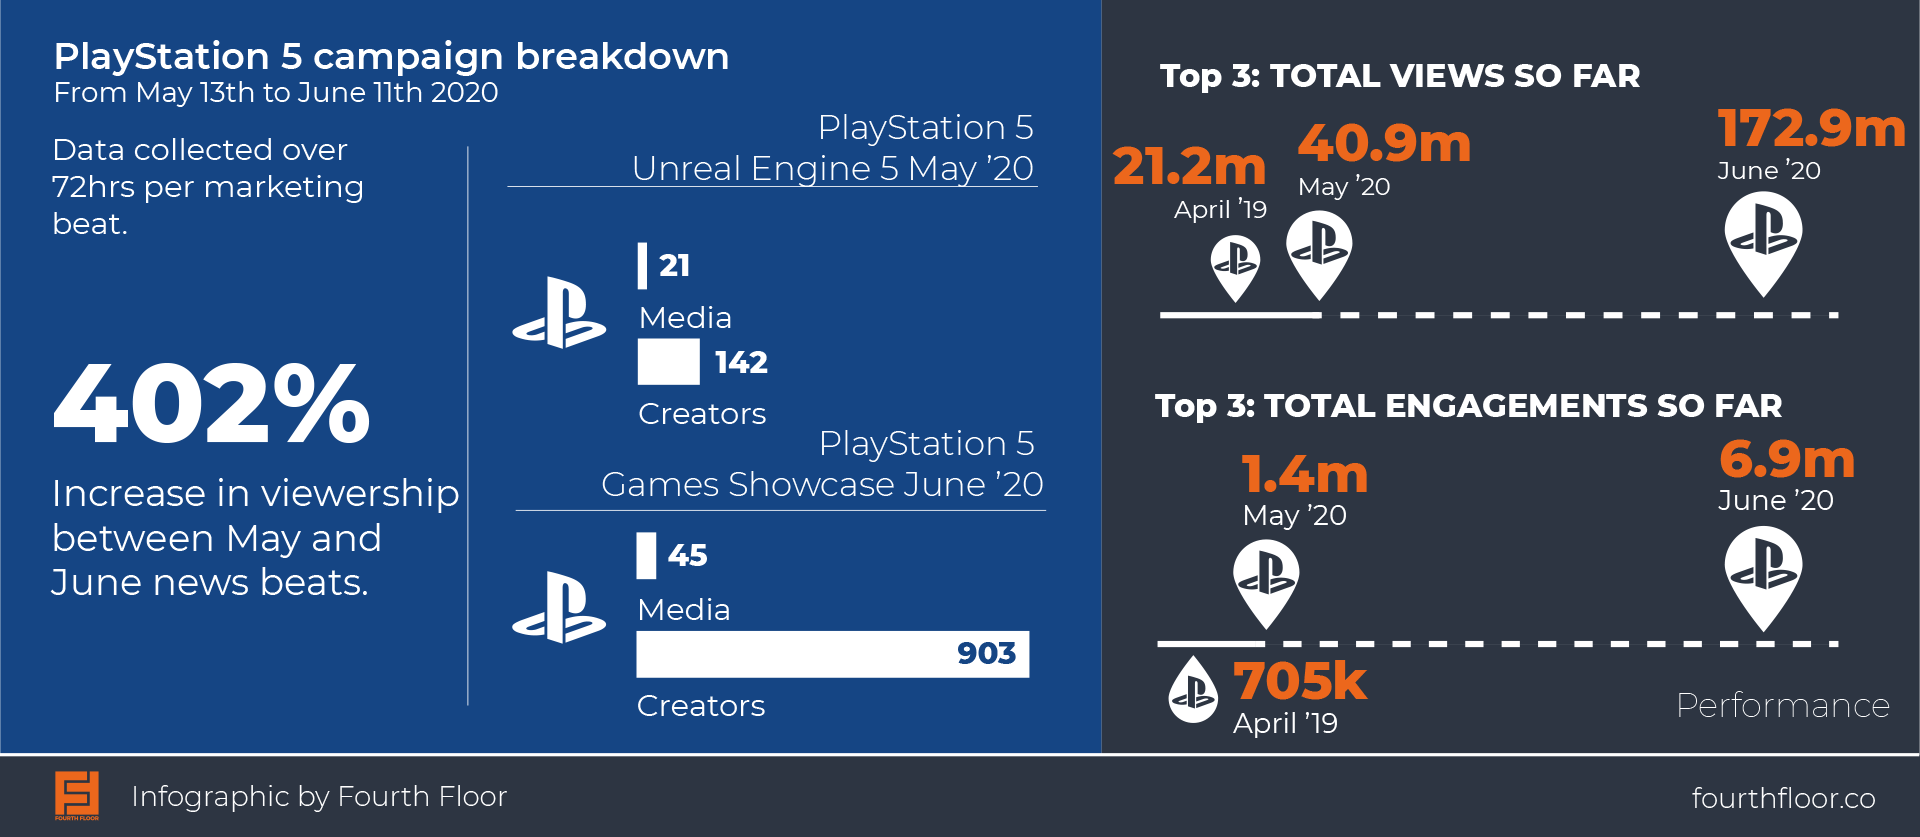 An infographic with important statistics related to the PlayStation 5 campaign.